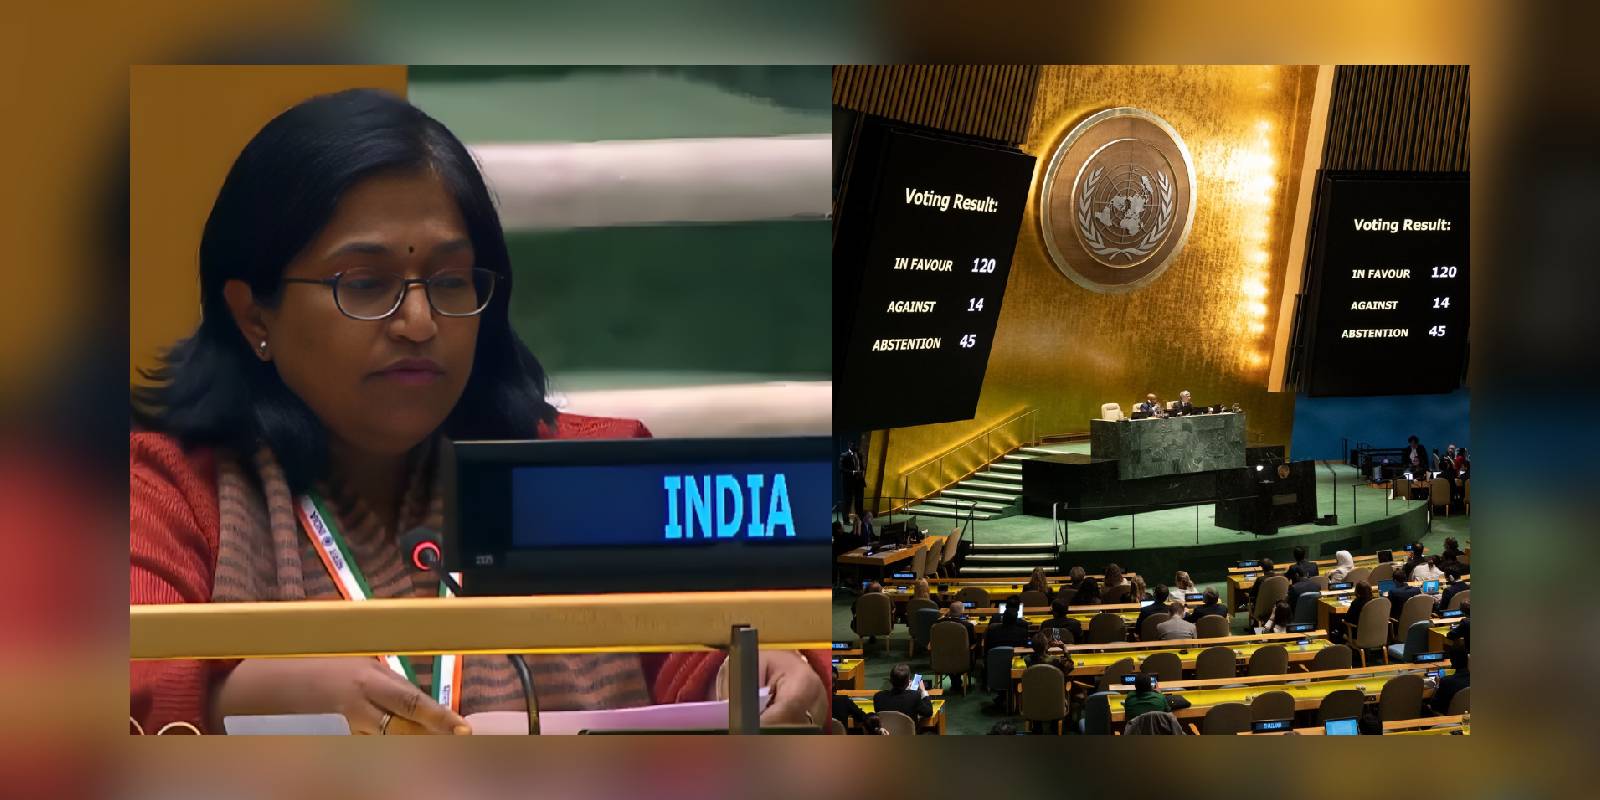 India abstains on resolution on Israel-Hamas conflict